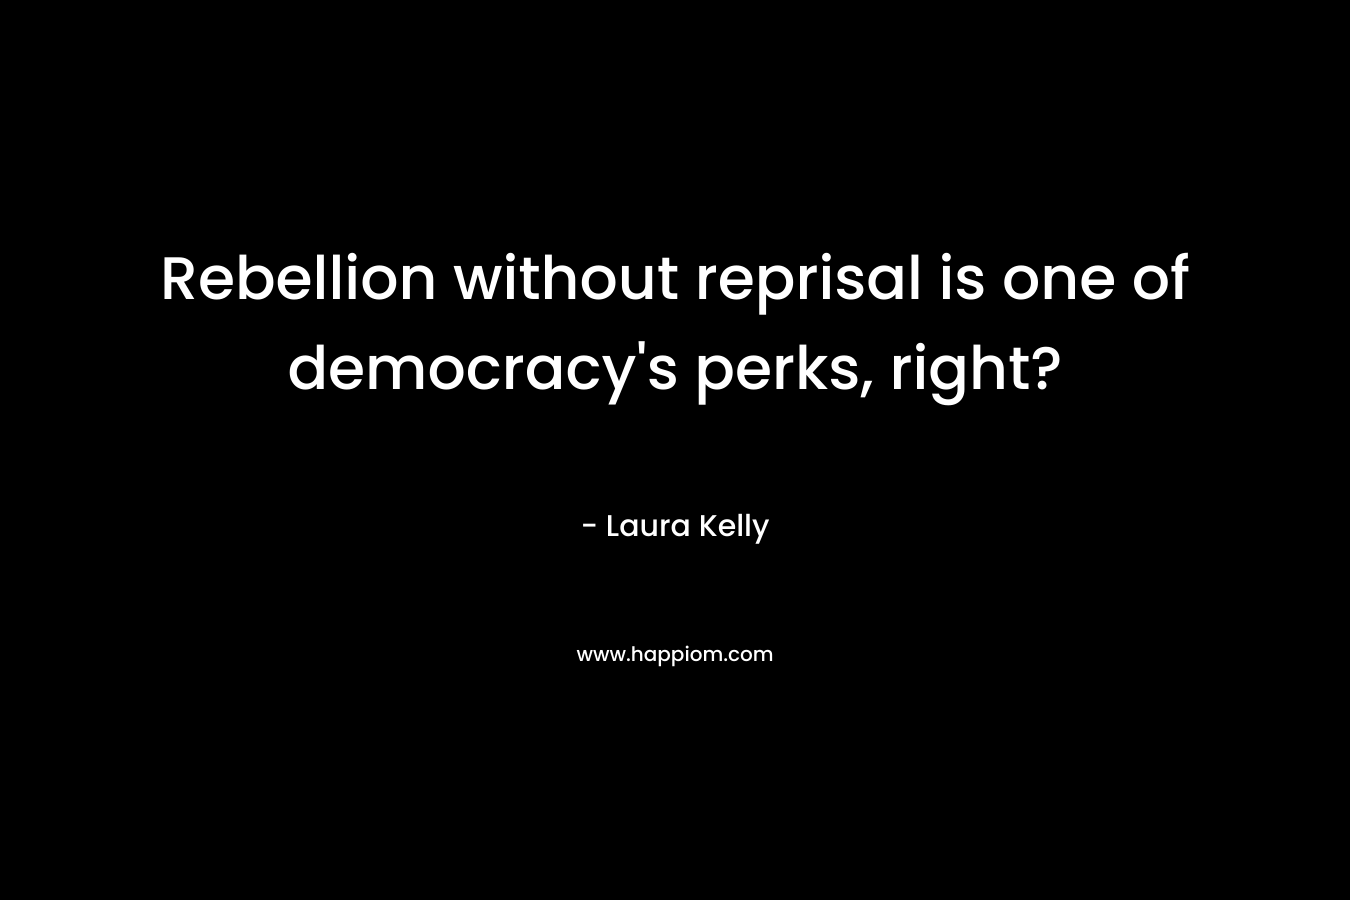 Rebellion without reprisal is one of democracy's perks, right?